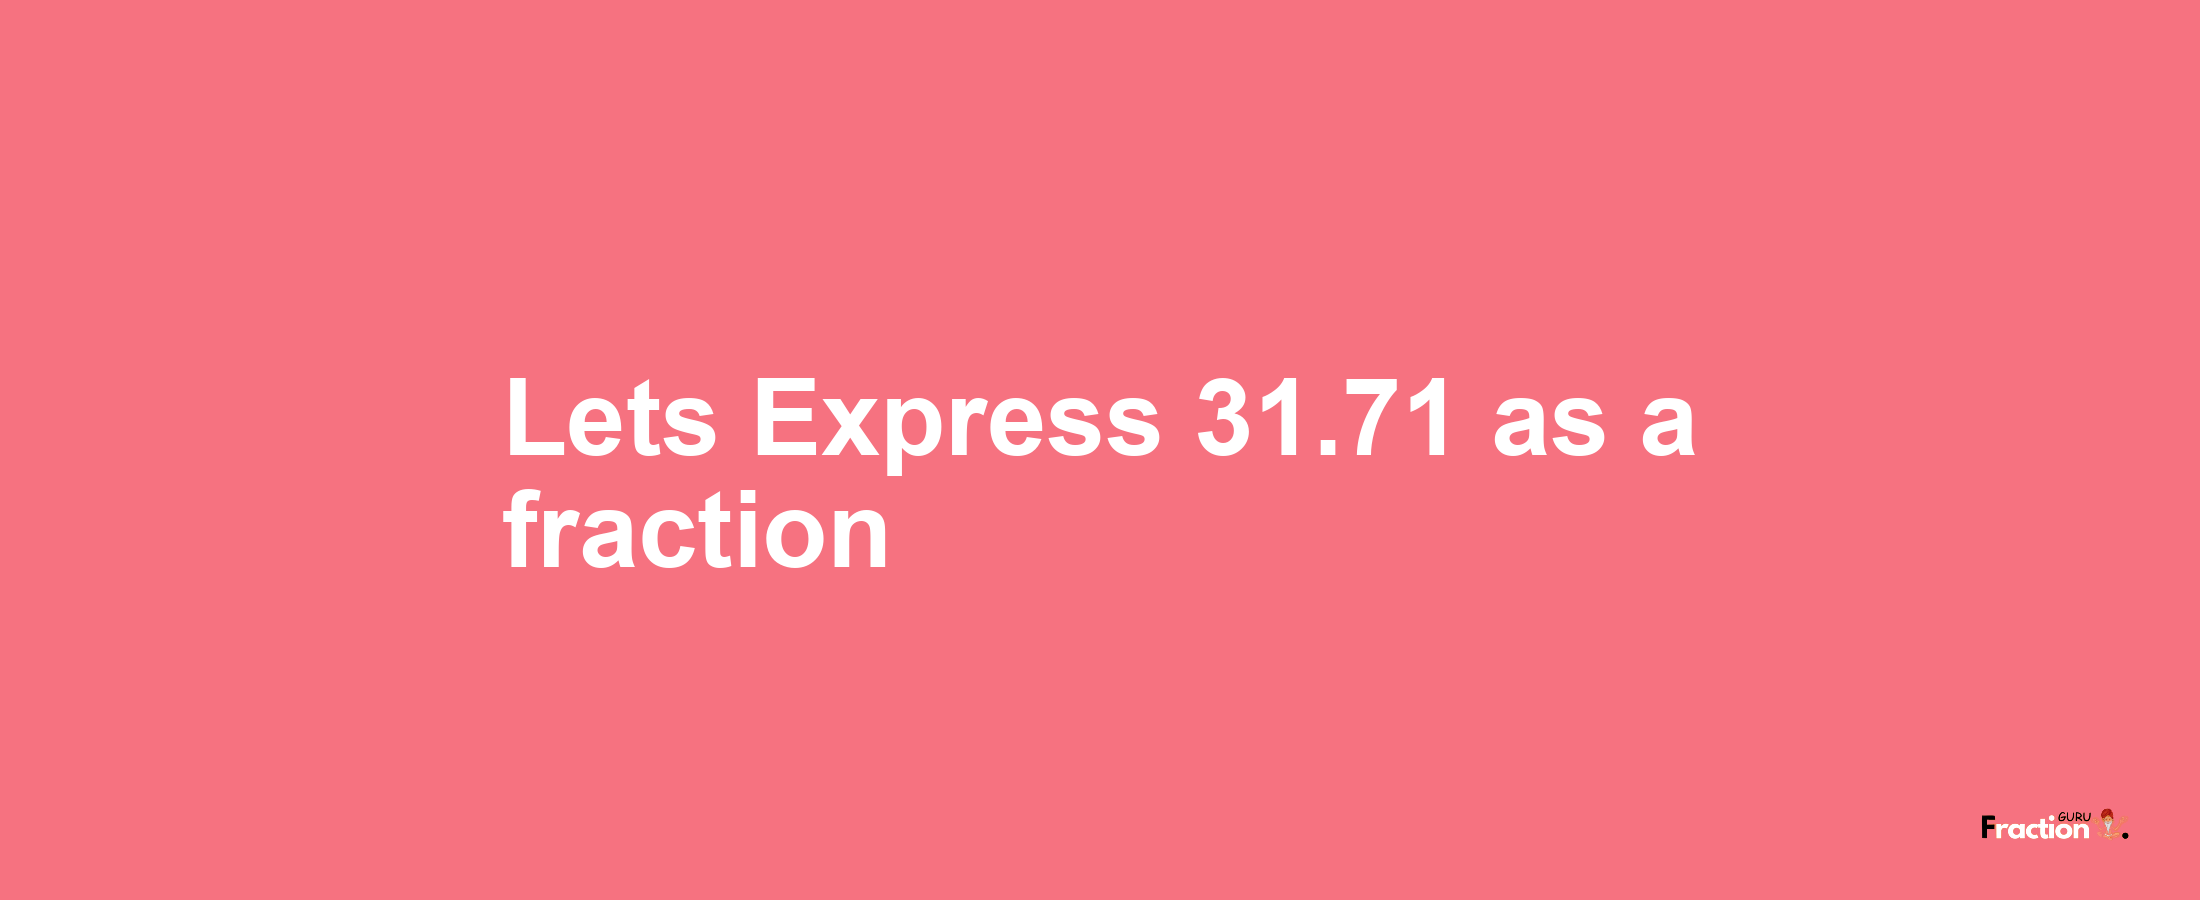 Lets Express 31.71 as afraction